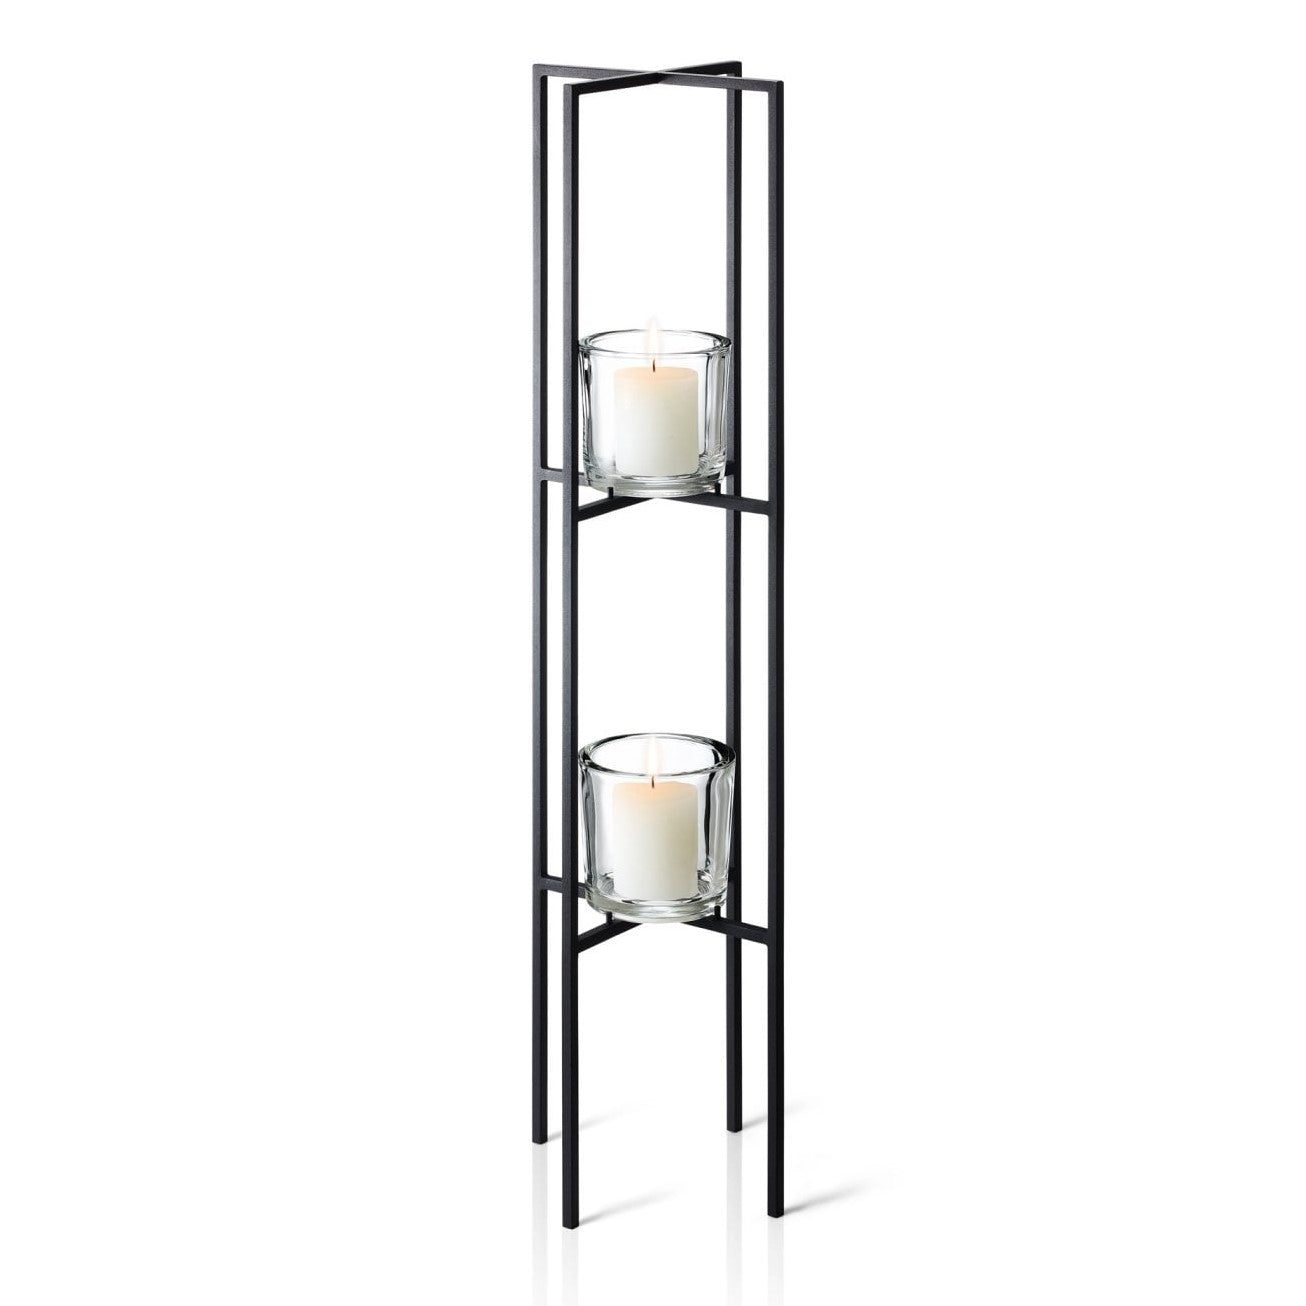 blomus-glass-candle-holders-on-2-tiered-black-steel-frame-nero-90cm